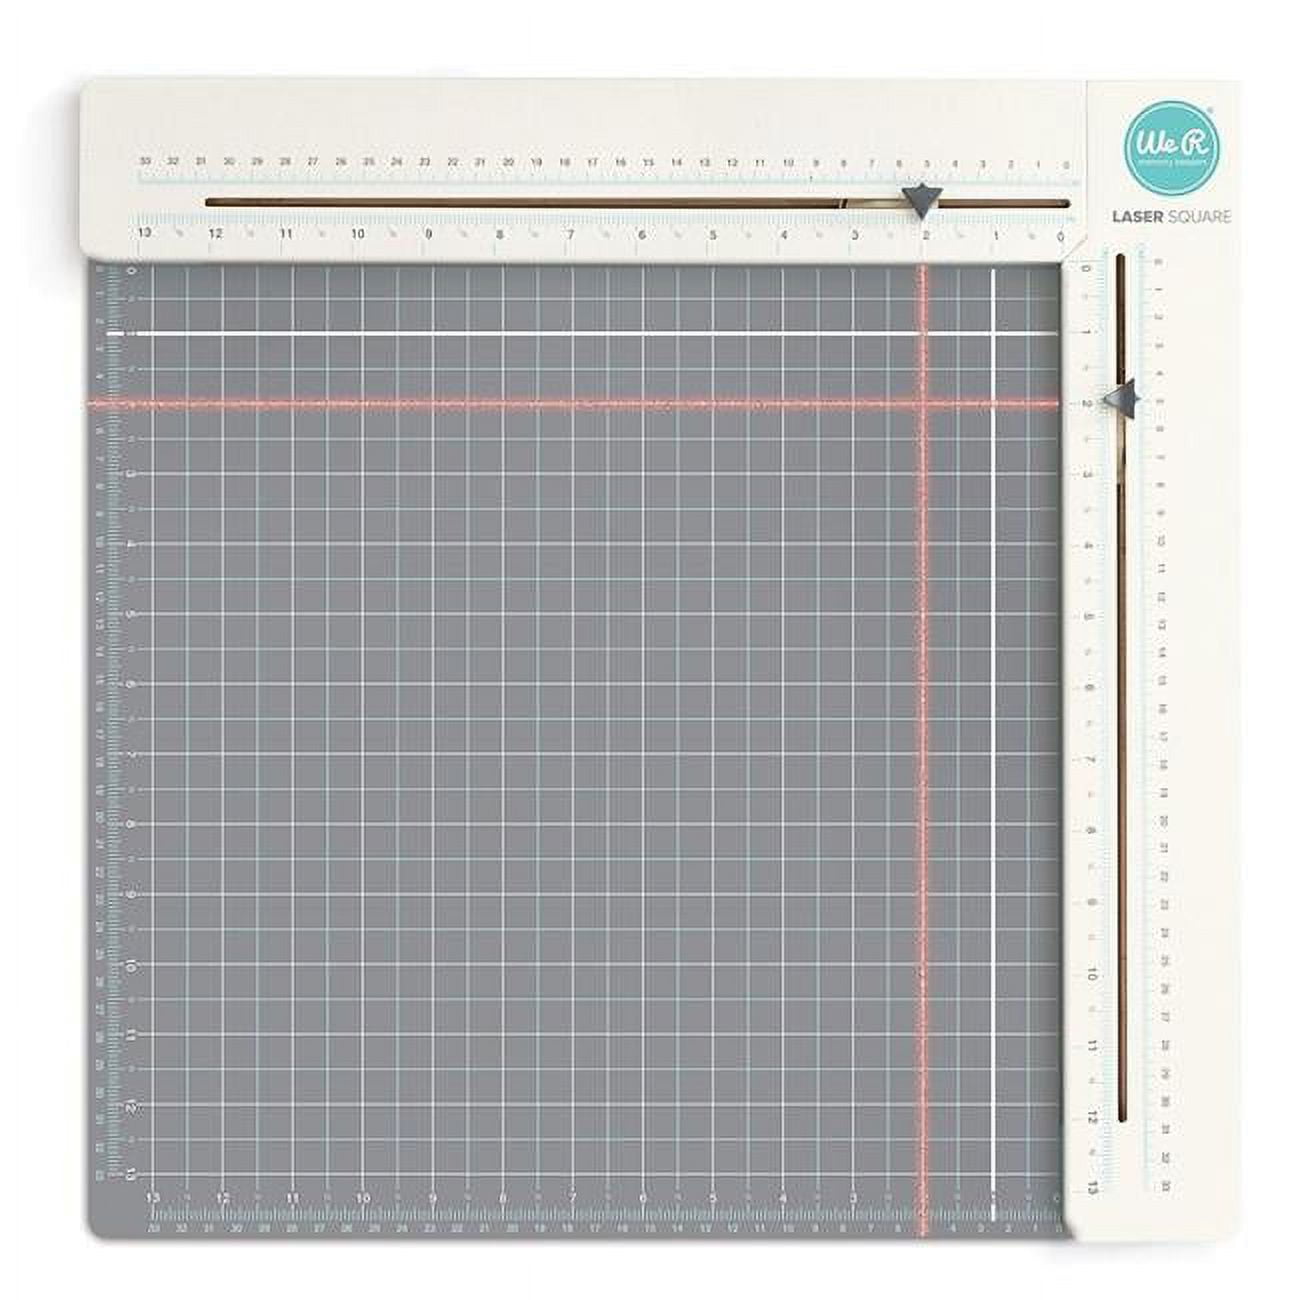 Silhouette Cameo 4 PRO - 24 w/ Siser HTV Rolls, Tools, Guides